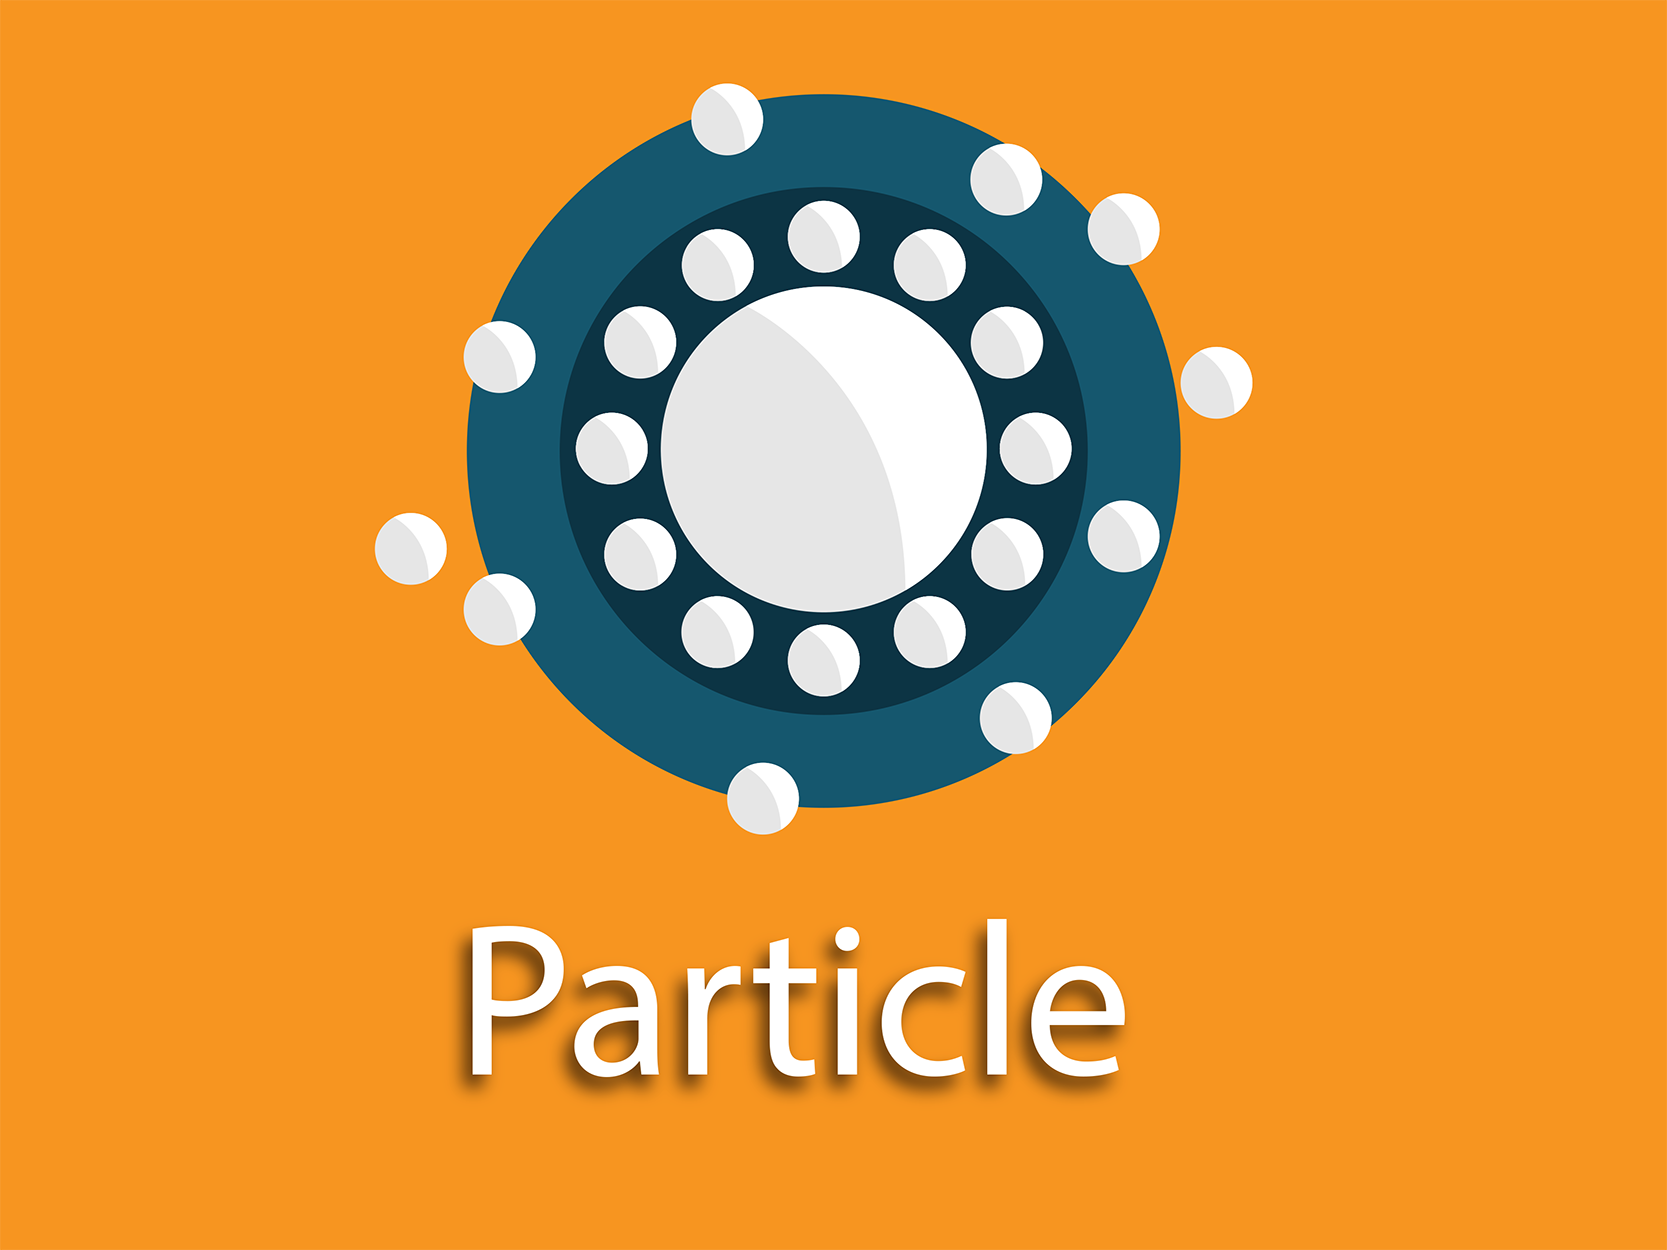 Click here to see the full list of particle tools